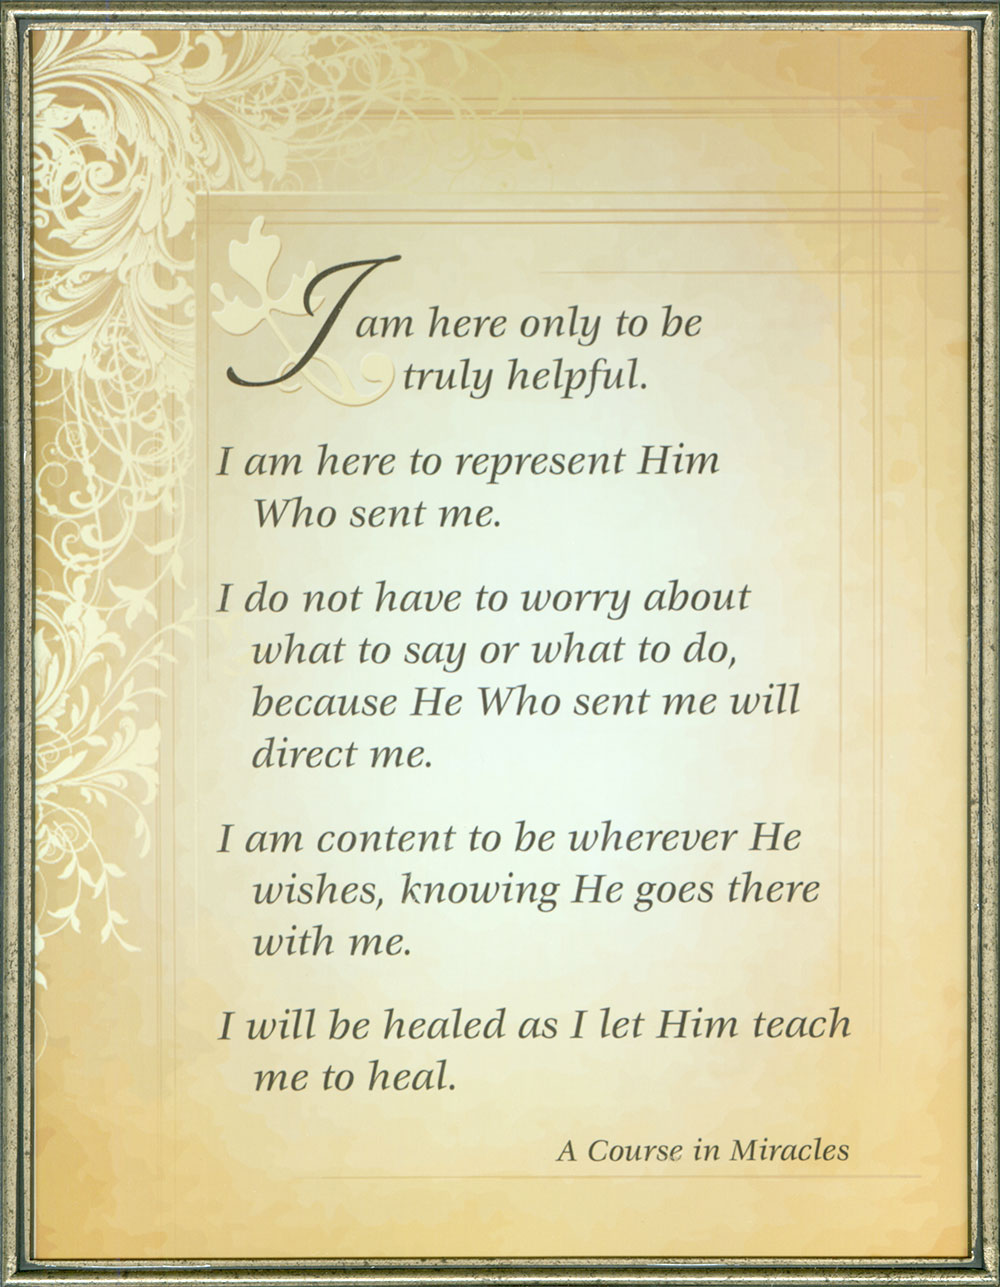 meditation graphic: Framed quote from ACIM text, Chapter 2, section V, paragraph 19: "I am here only to be truly helpful. I am here to represent Him Who sent me. I do not have to worry about what to say or what to do, because He Who sent me will direct me. I am content to be wherever He wishes, knowing He goes there with me. I will be healed as I let Him teach me to heal." - T-2.V.18:2-6